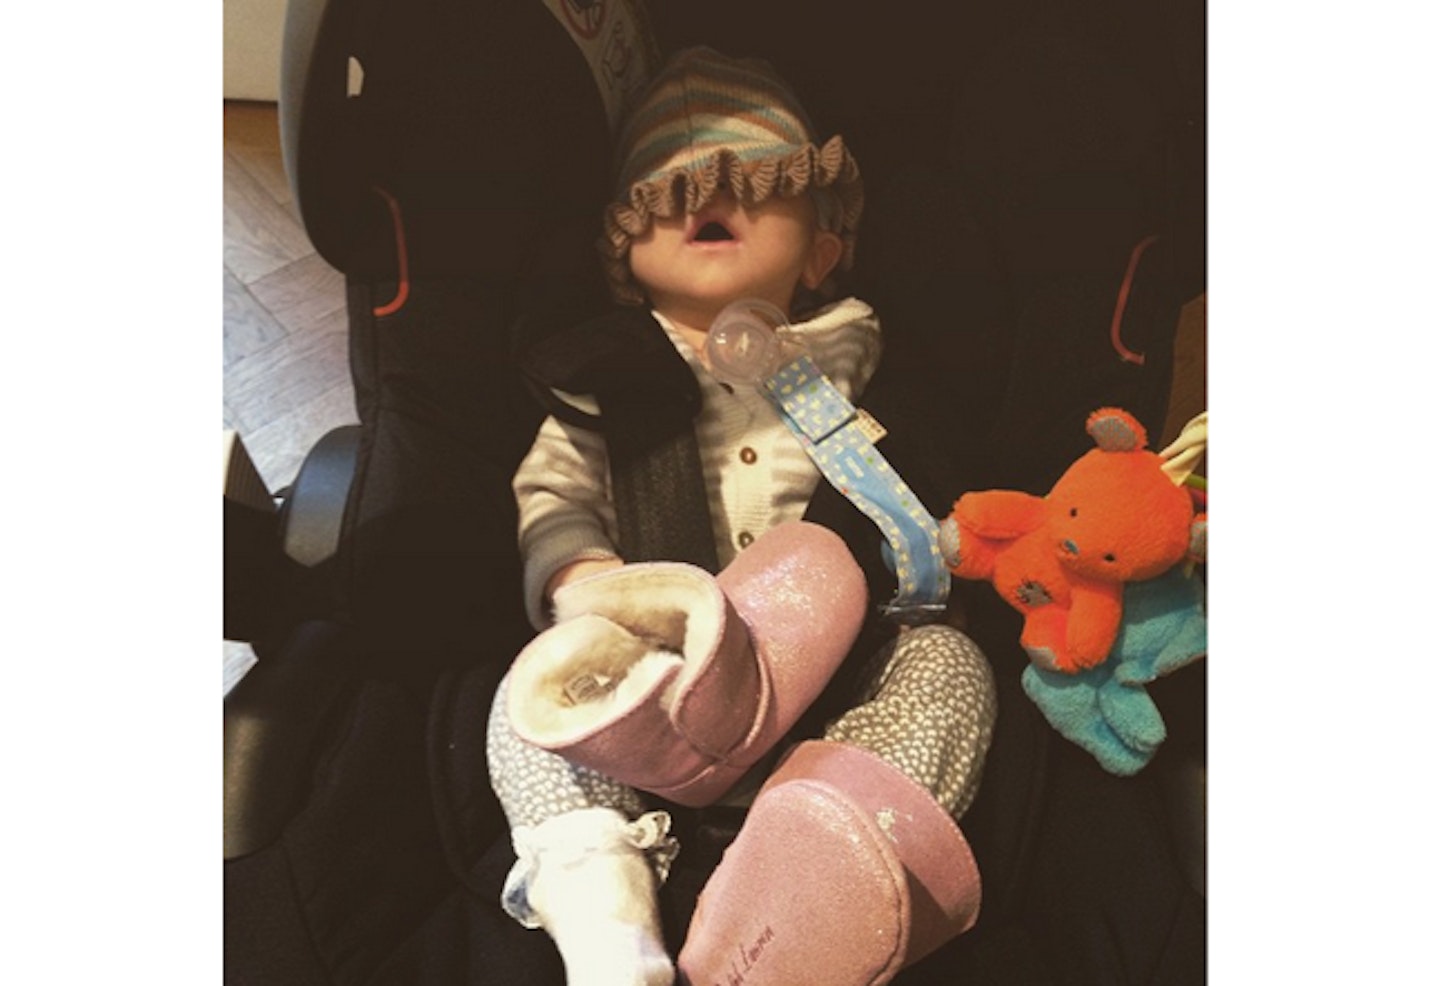 “Willow is PASSED OUT!! catchin flys! #baby #mummypost #toofunny #love”